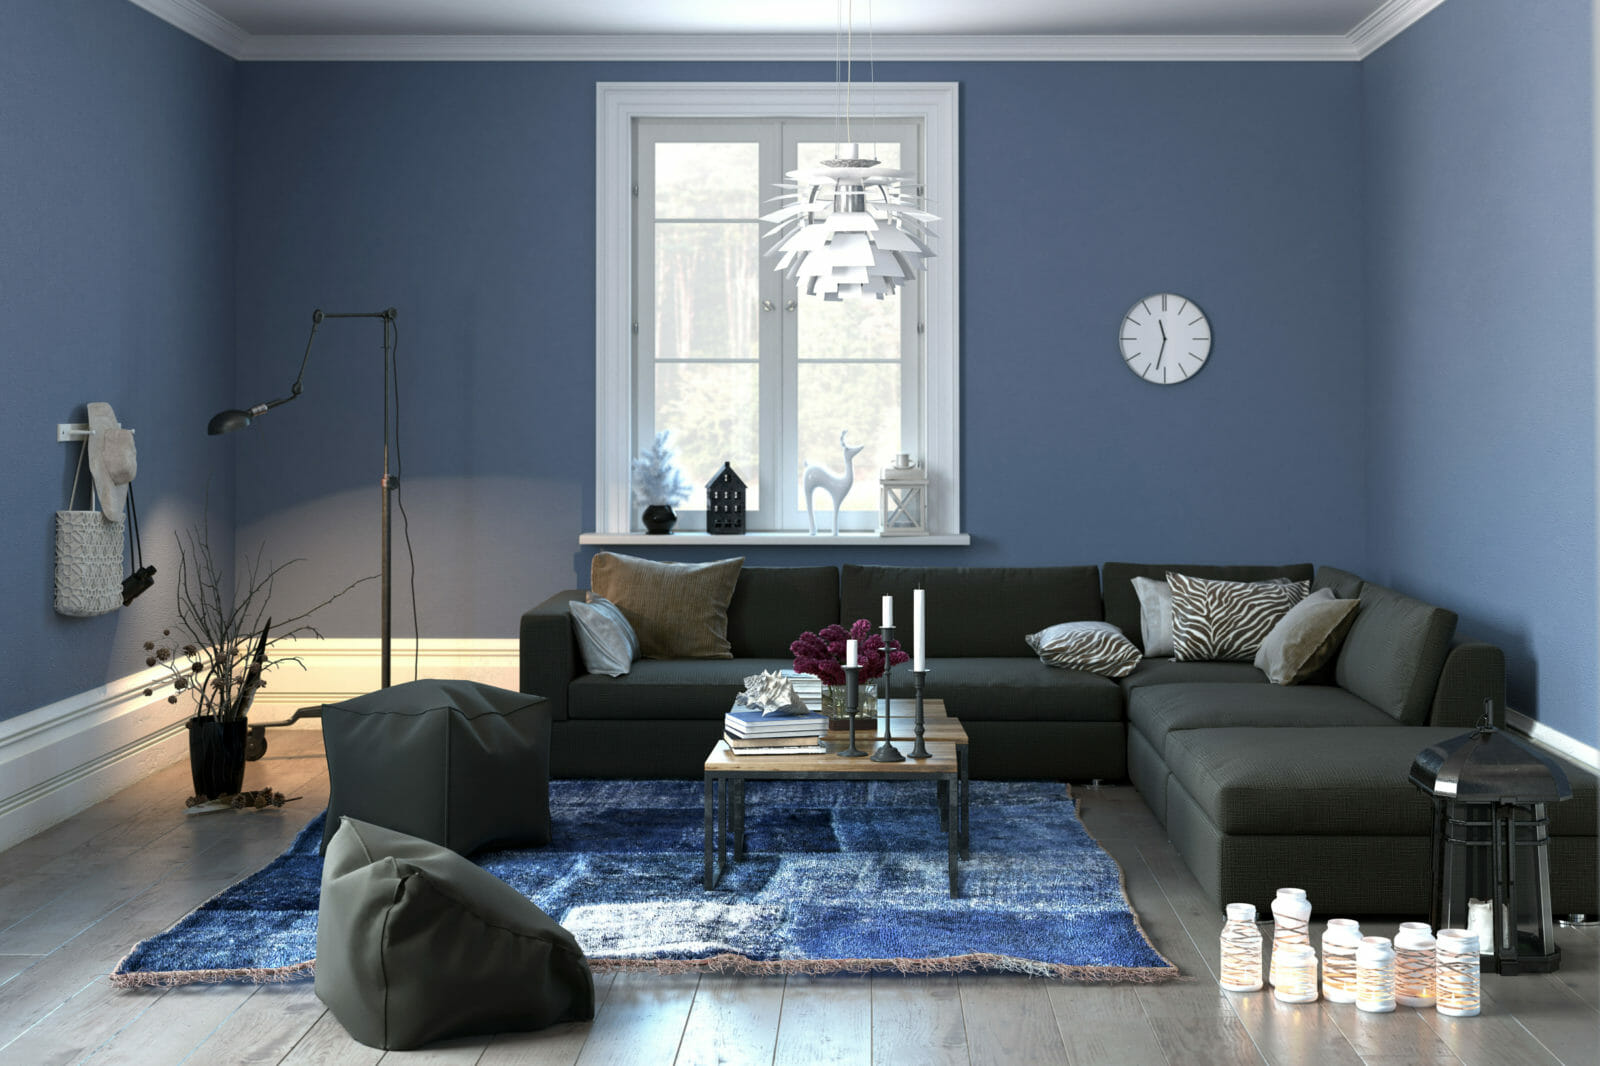 Living room in blue, the colour trend for 2017